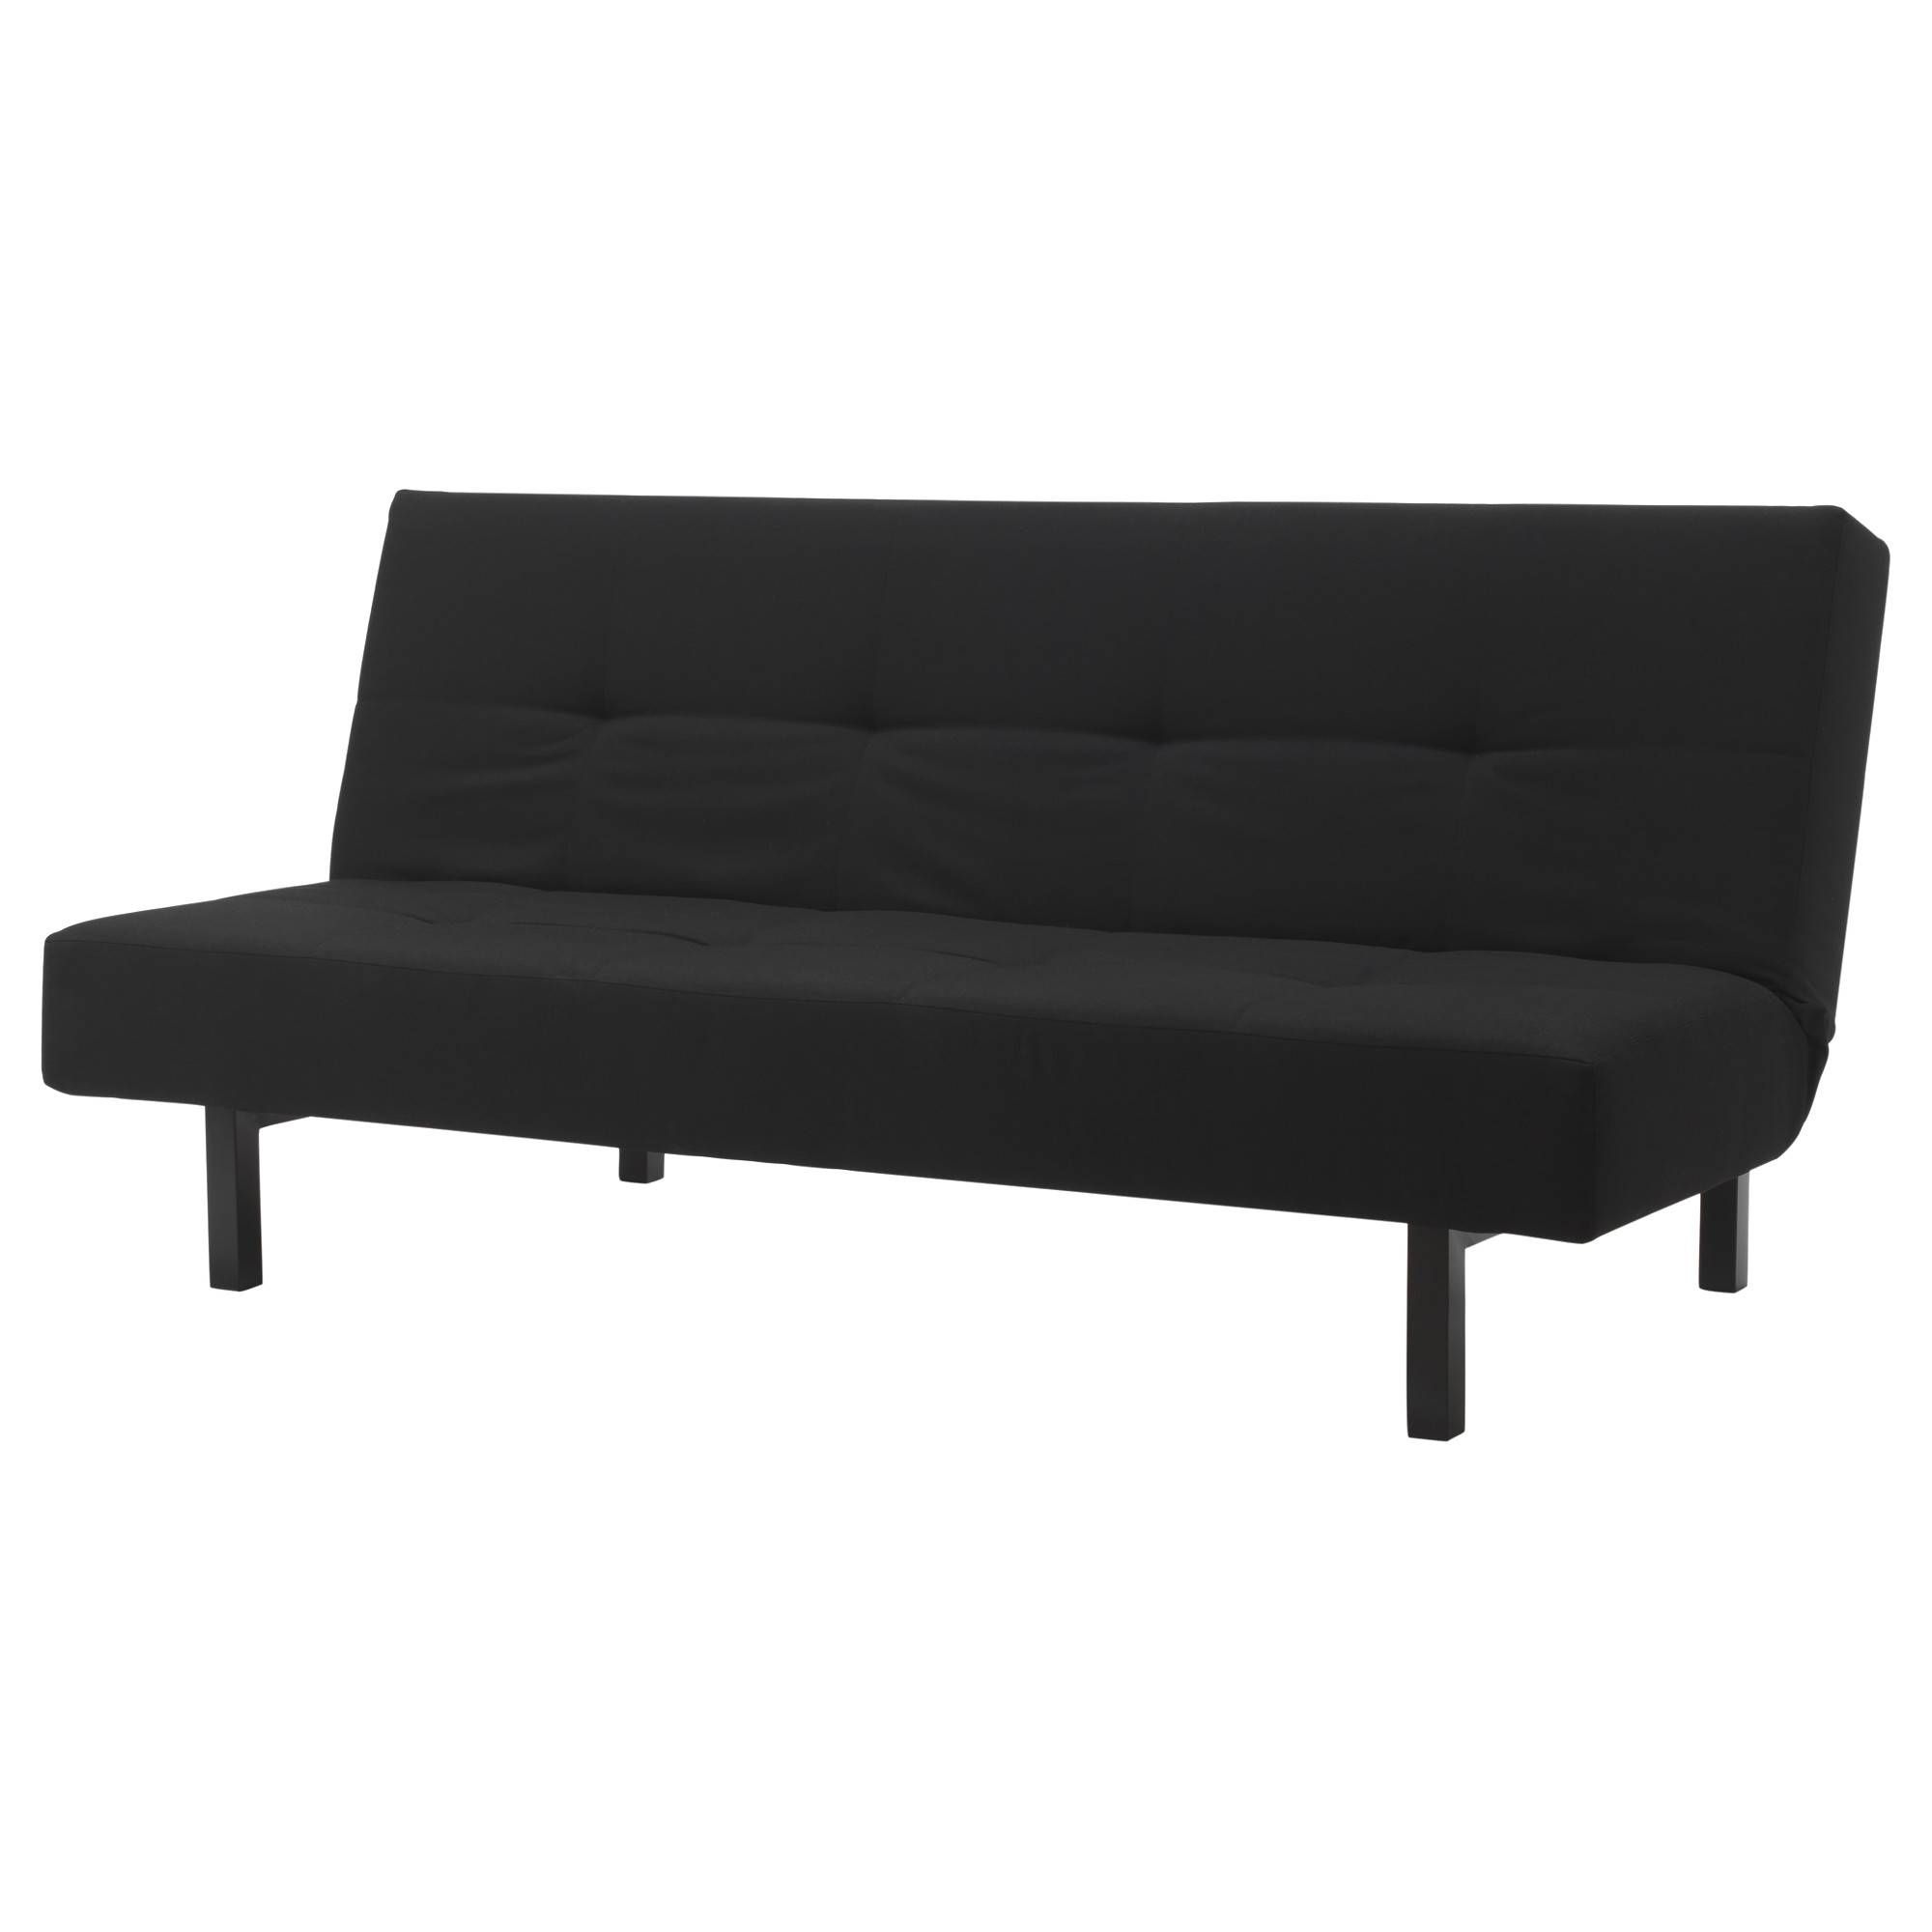 Sofa Beds & Futons – Ikea Throughout Futon Couch Beds (View 4 of 15)